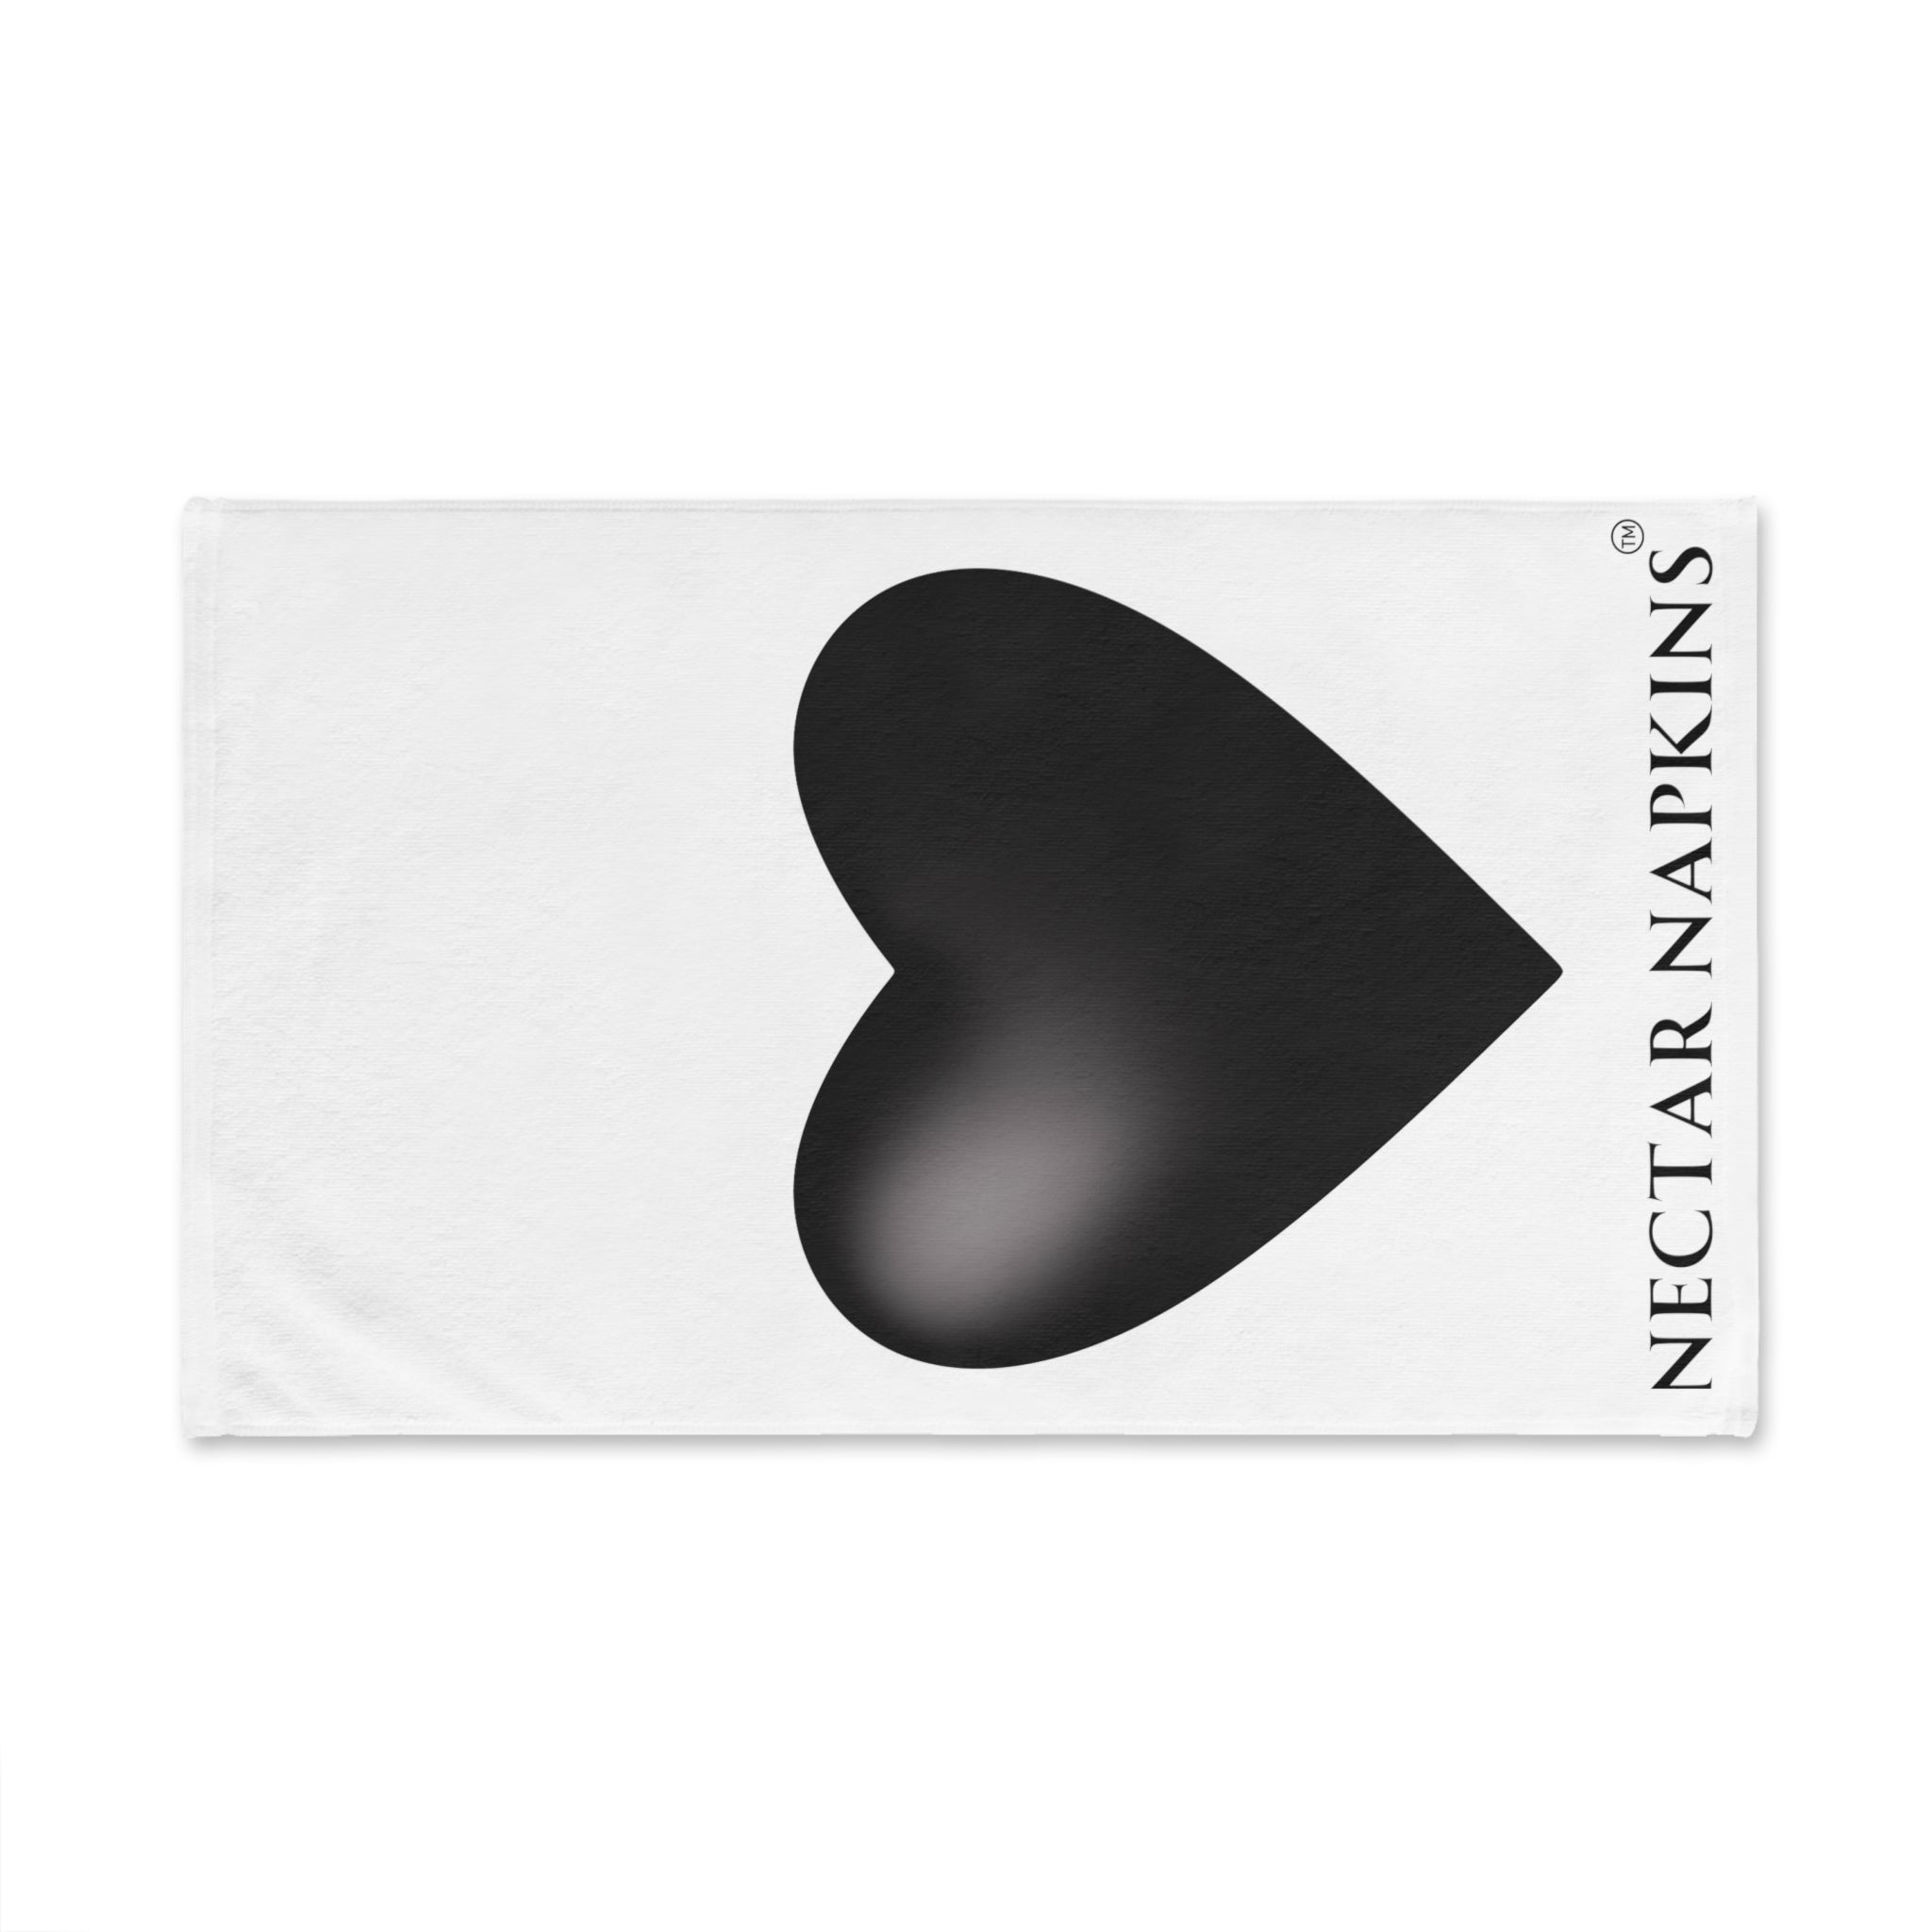 Black Heart White | Funny Gifts for Men - Gifts for Him - Birthday Gifts for Men, Him, Her, Husband, Boyfriend, Girlfriend, New Couple Gifts, Fathers & Valentines Day Gifts, Christmas Gifts NECTAR NAPKINS